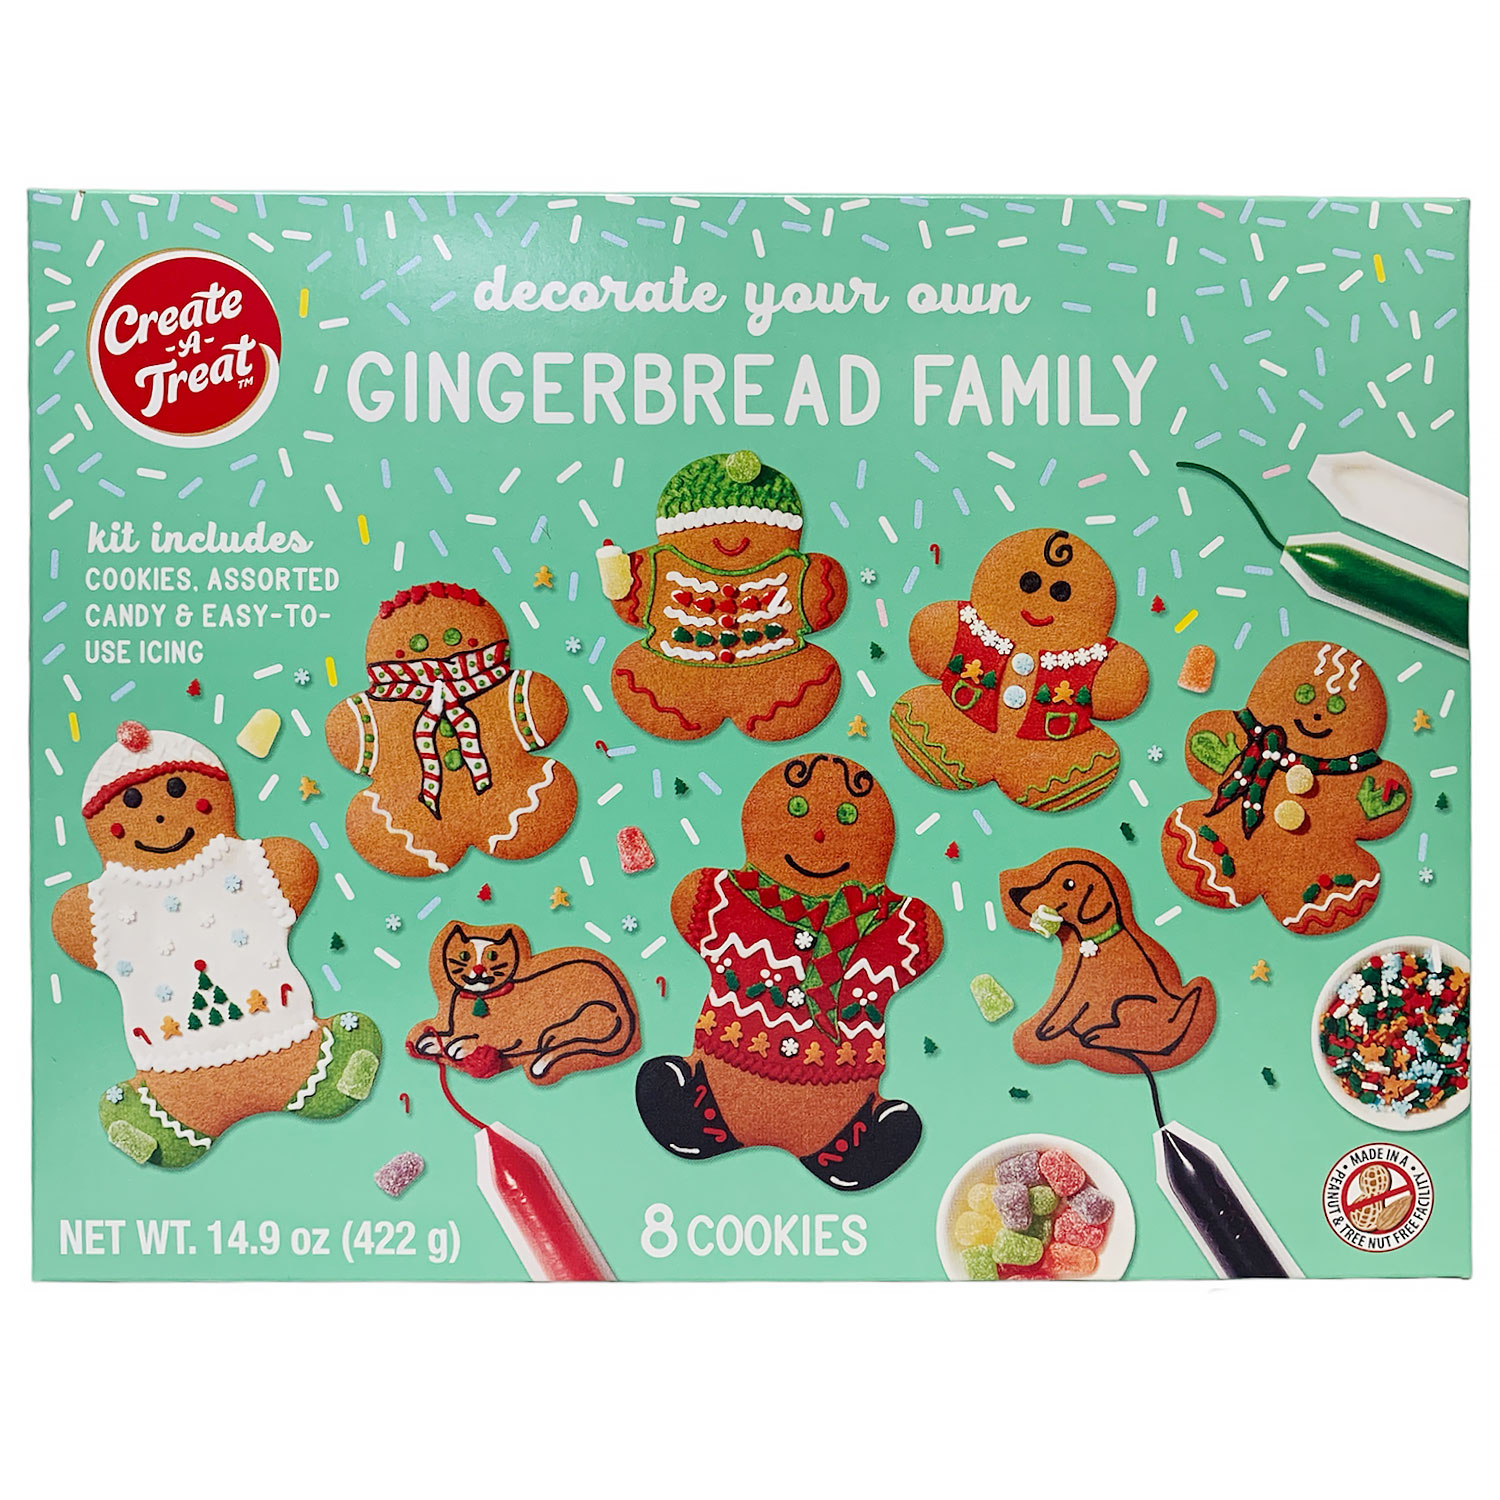 Shop Christmas Loaf Pan Kit: Gingerbread Man Loaf Pans with Bags